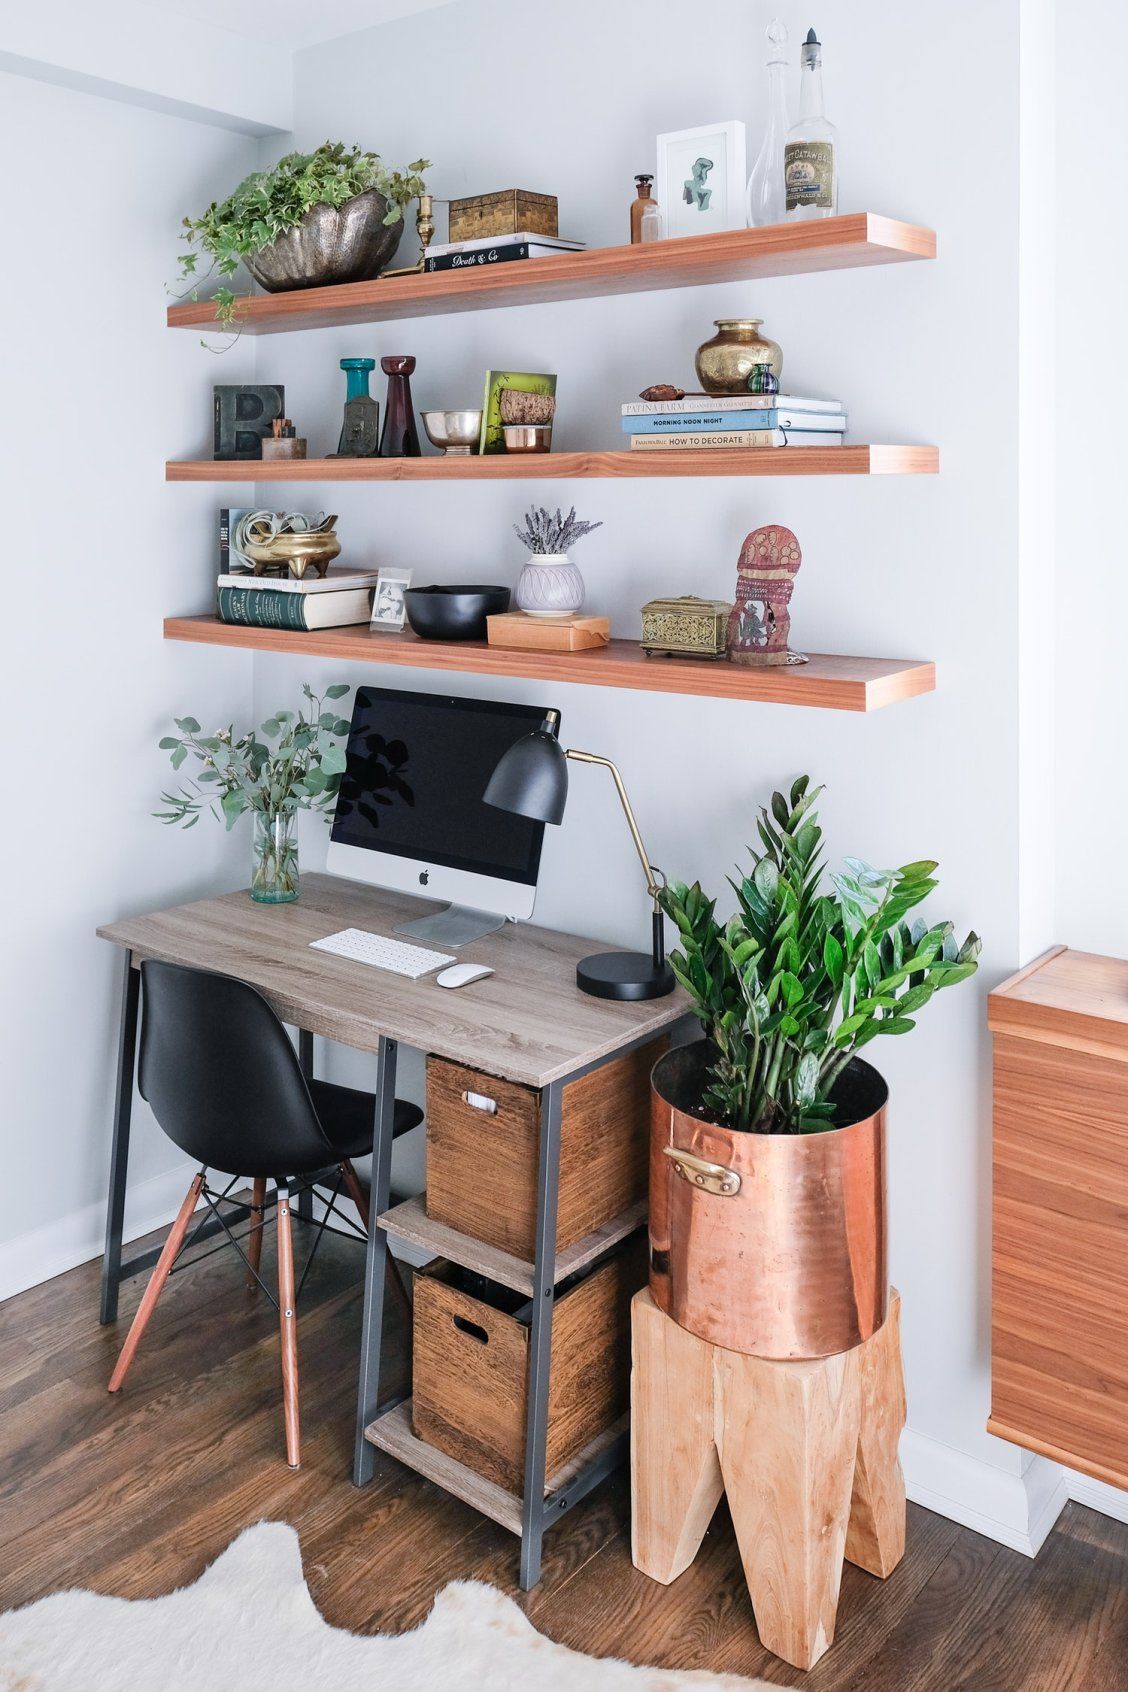 The Home Office Mistake We Keep Seeing Over and Over Again